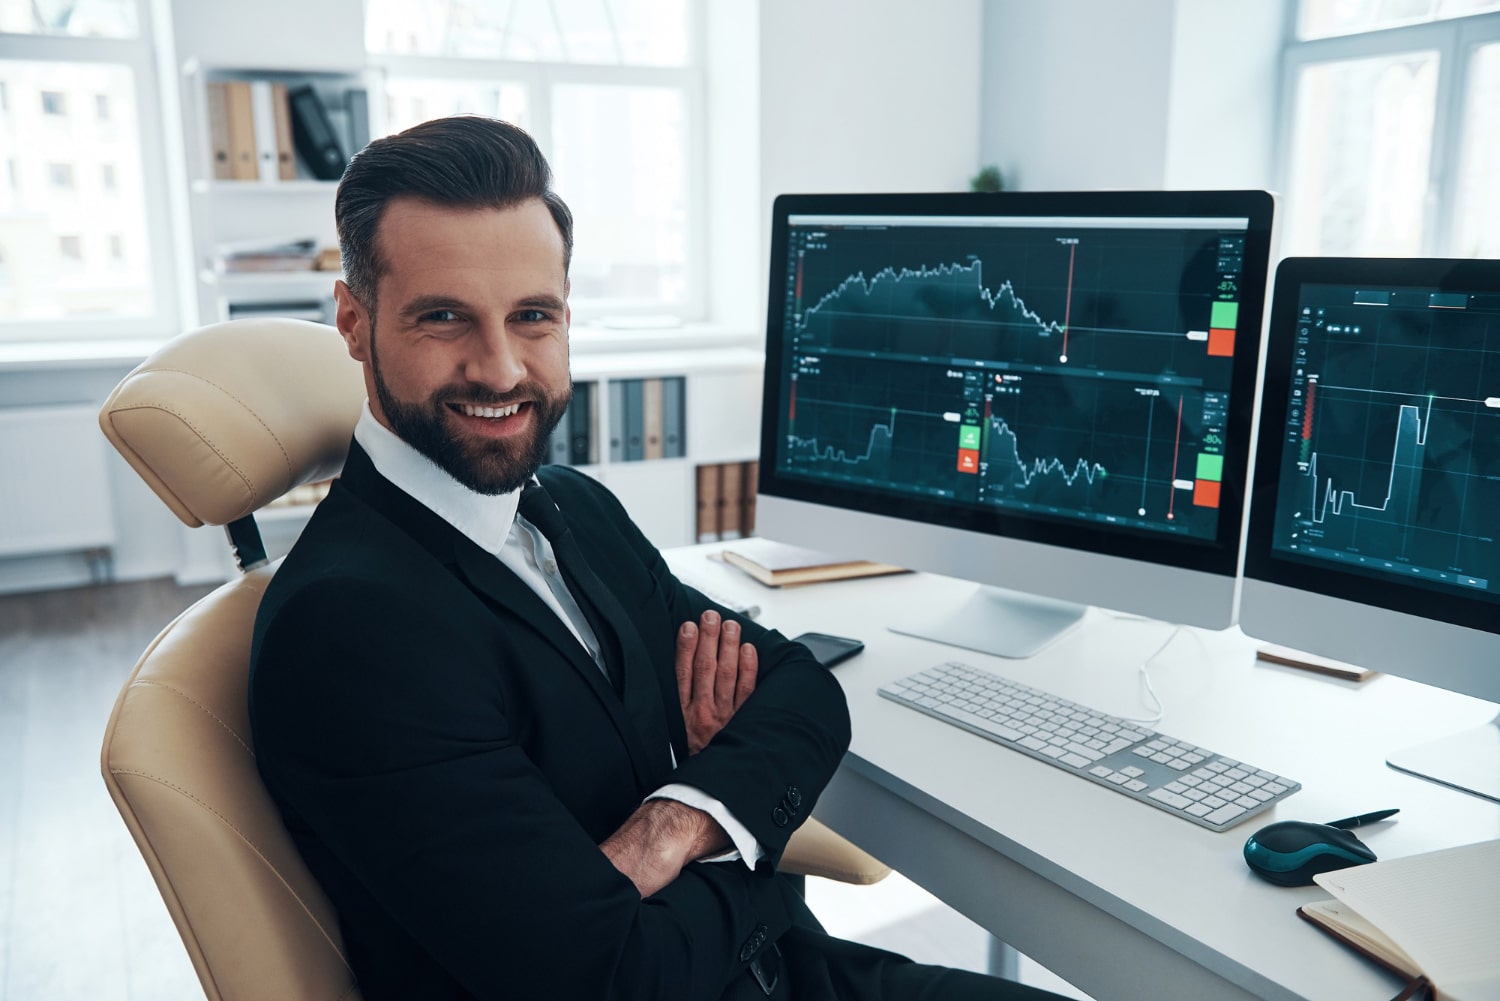 Confident Businessman Smiling In Office With Financial Graphs On Monitors